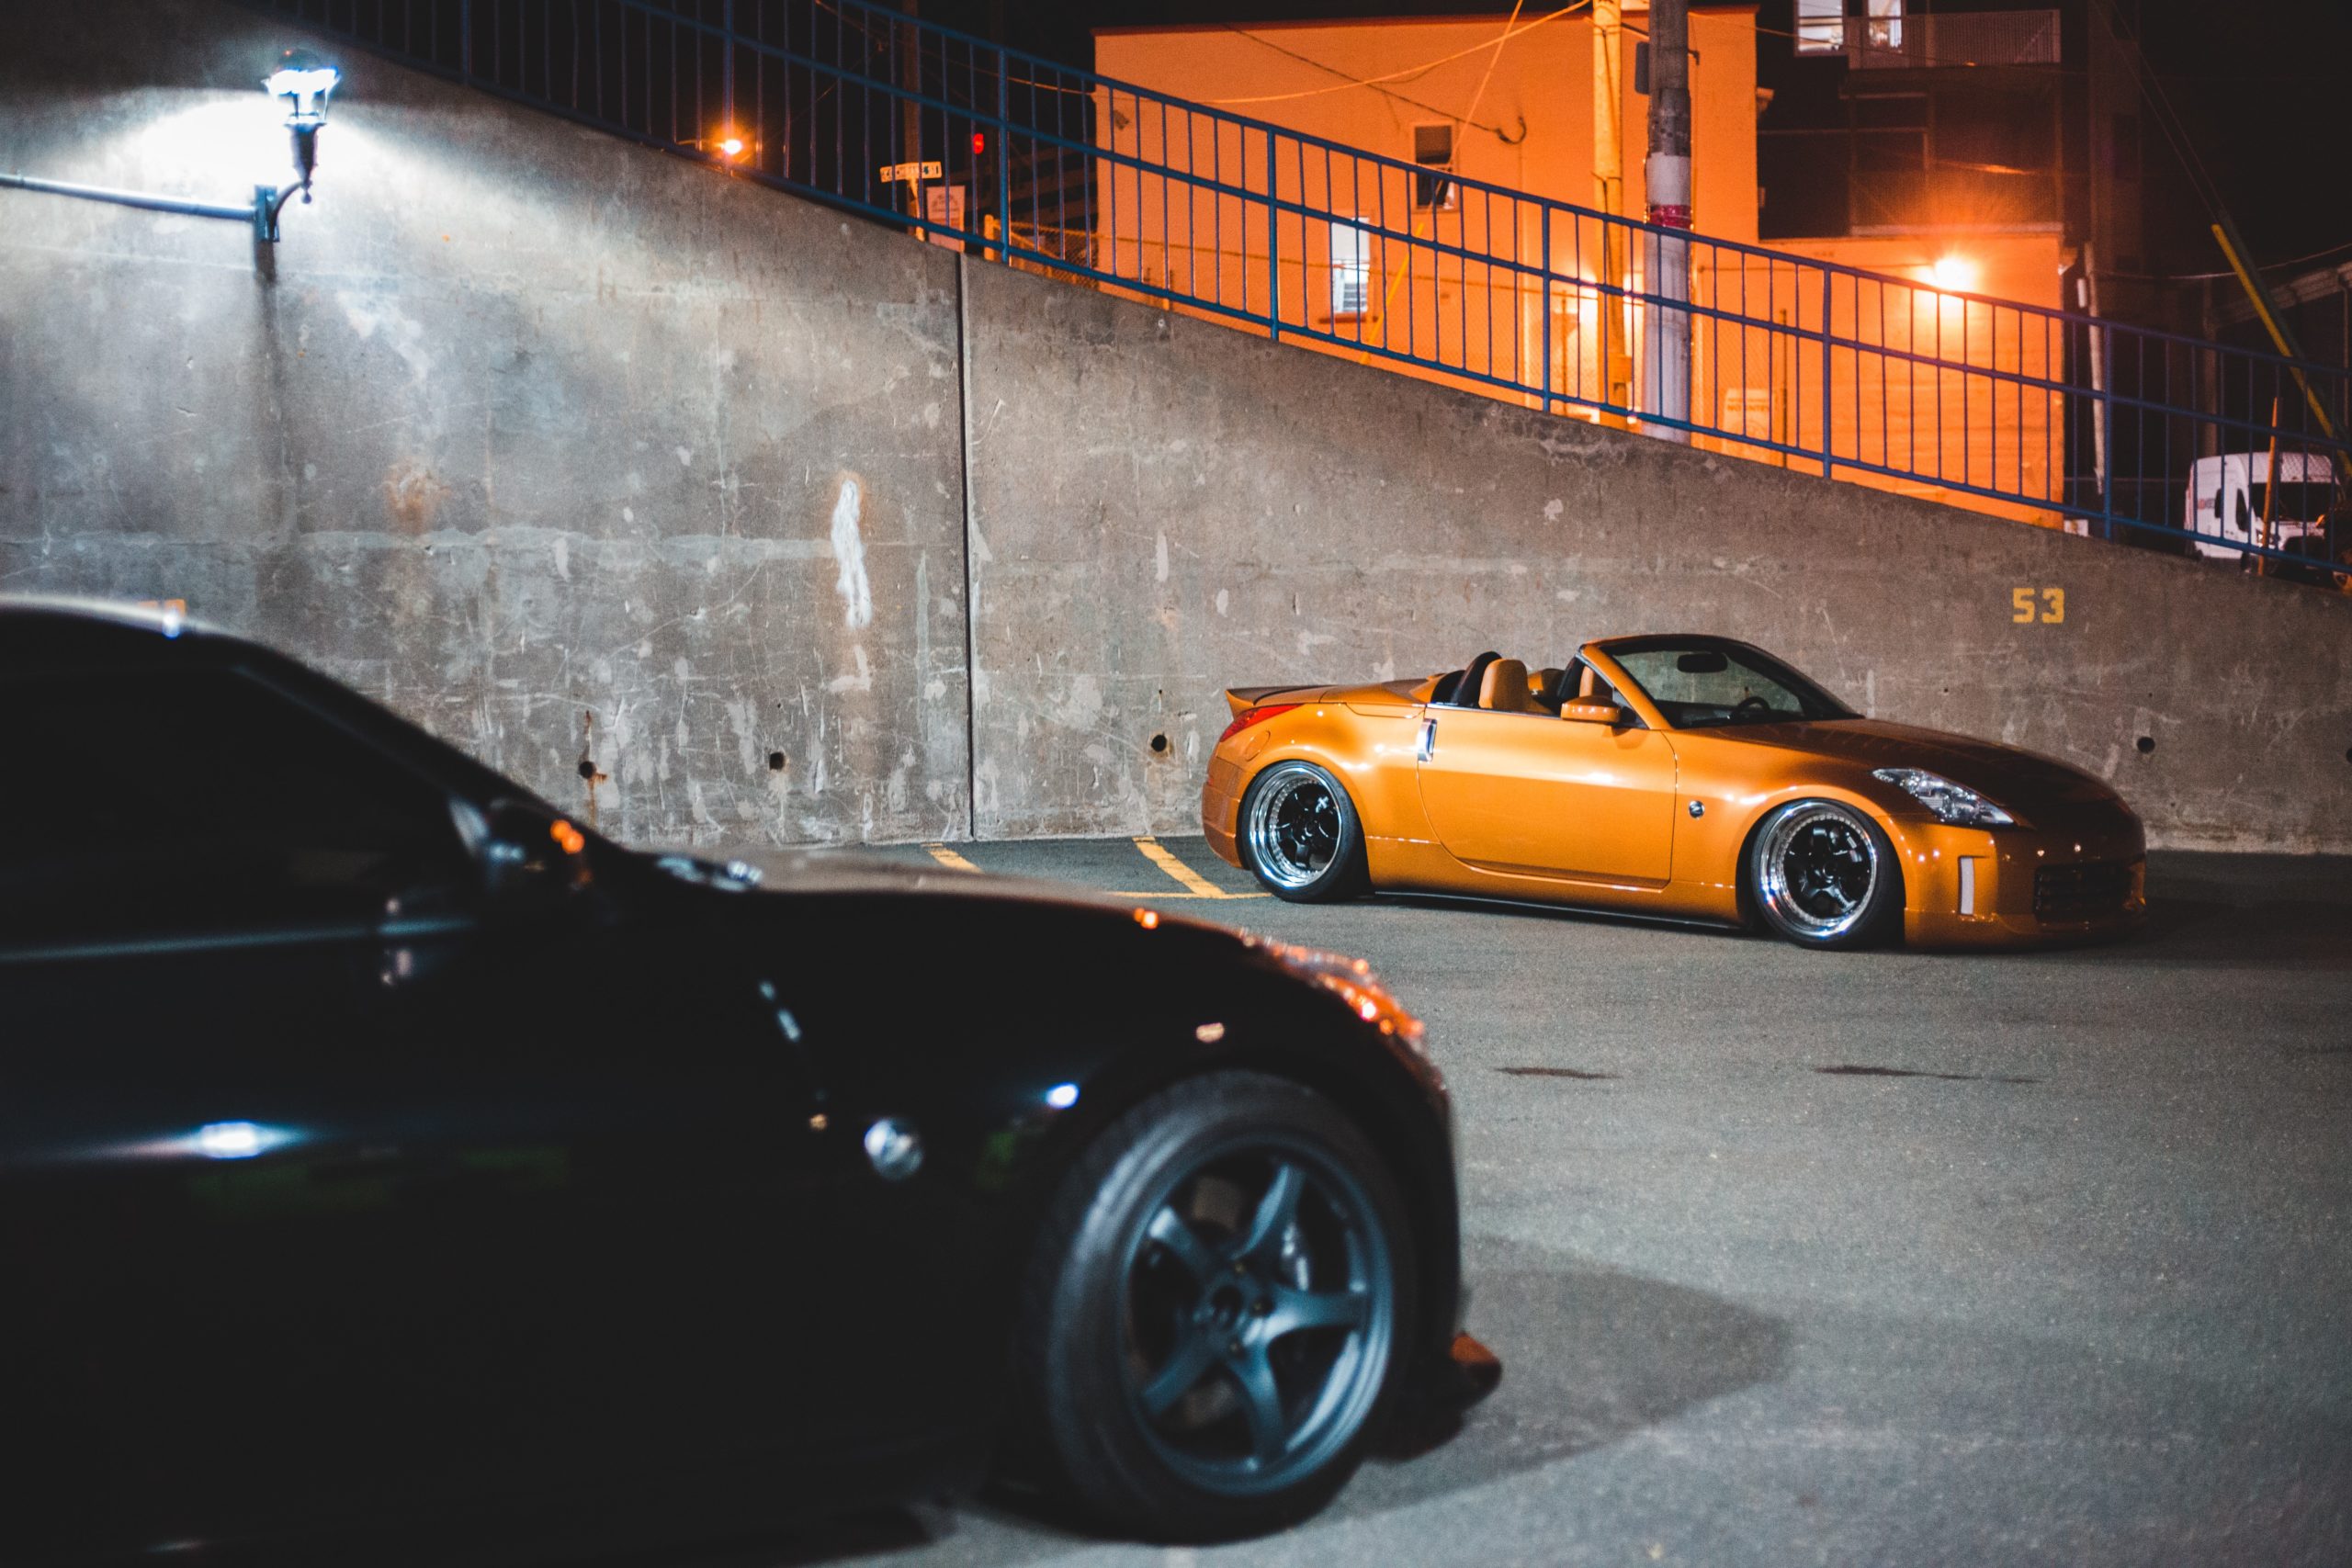 Street Racing Crimes Affect More Than Just the Driver